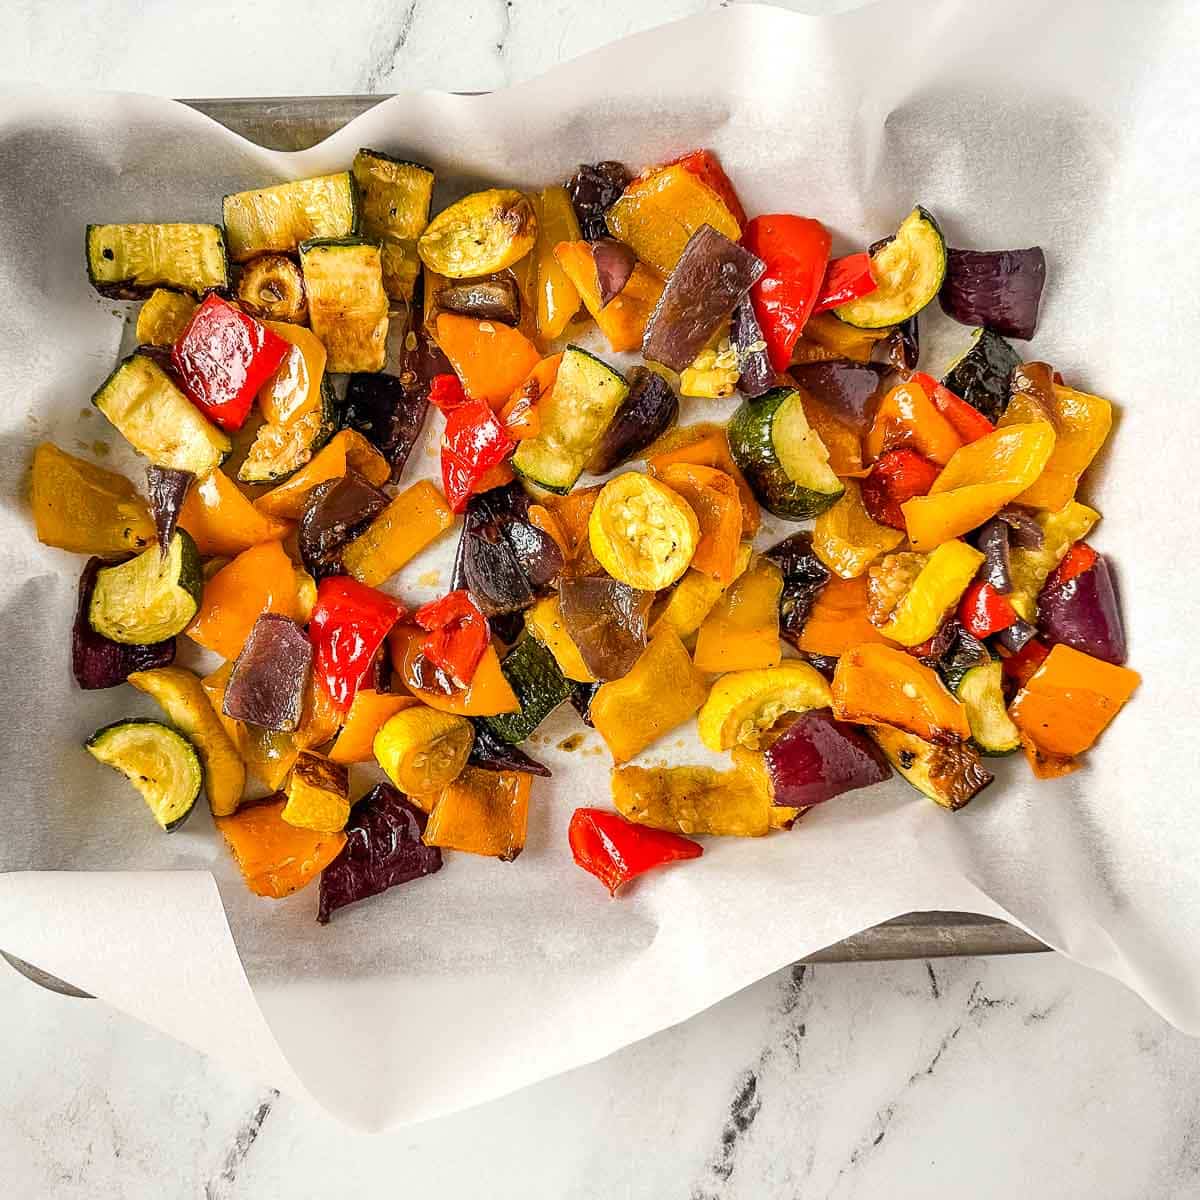 Roasted vegetables on a lined sheet tray.